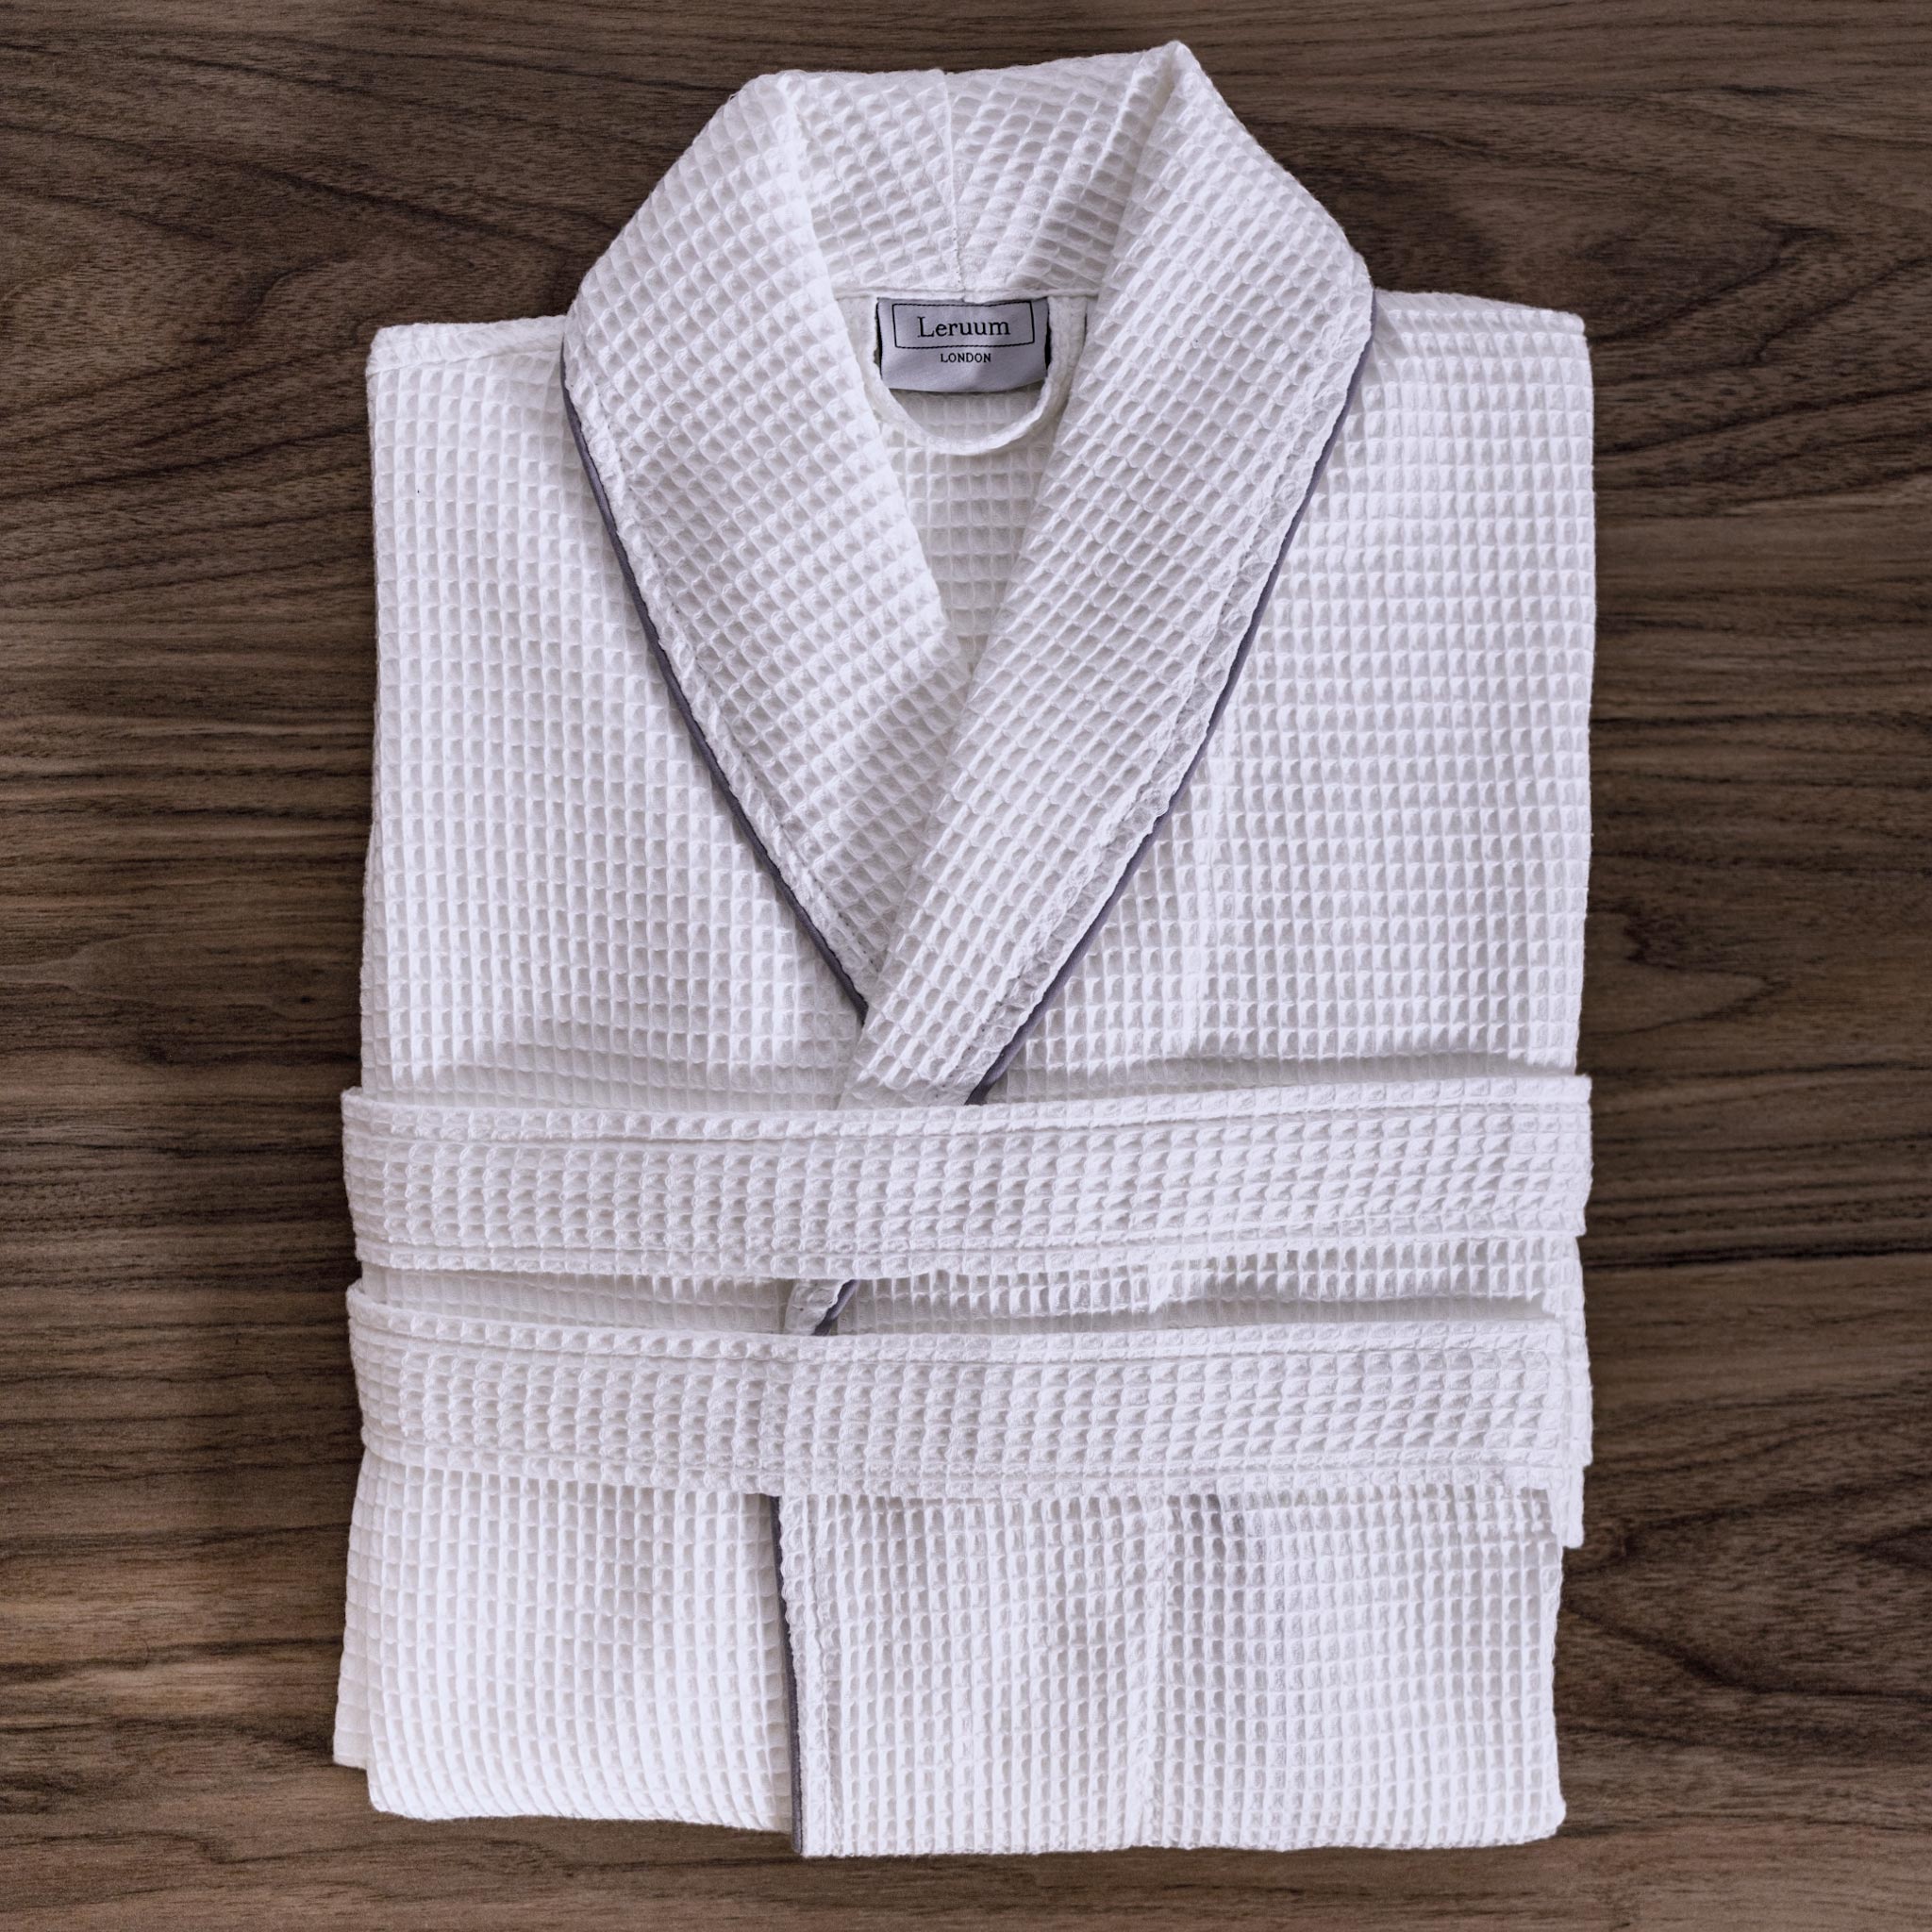 Is the Brooklinen Waffle Robe Worth It? My Honest Review